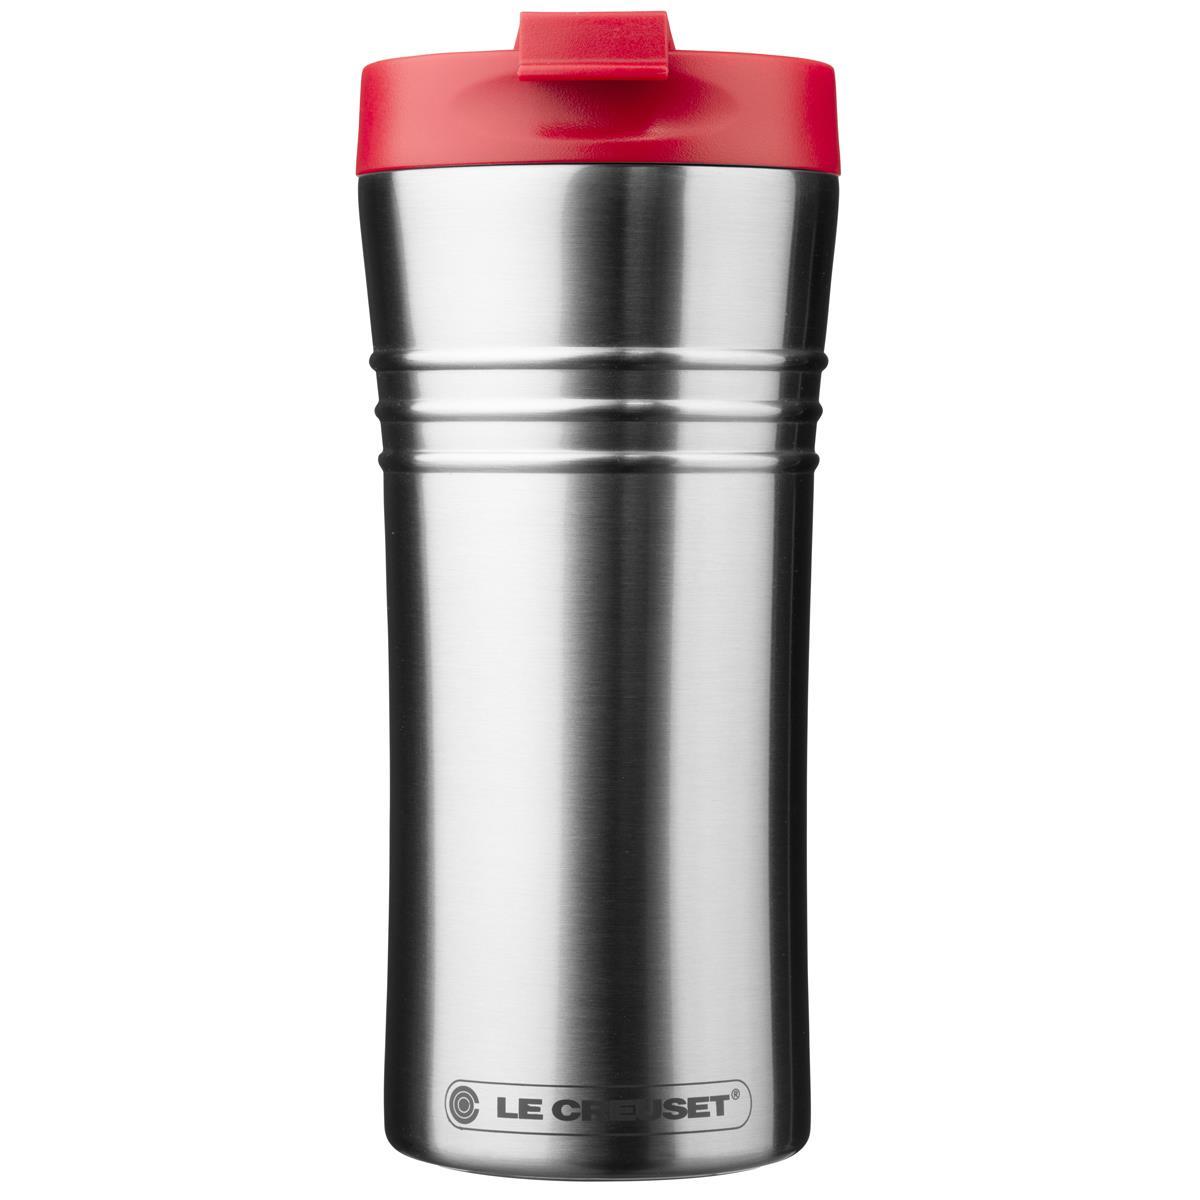 What features are included with the Le Creuset travel mug?